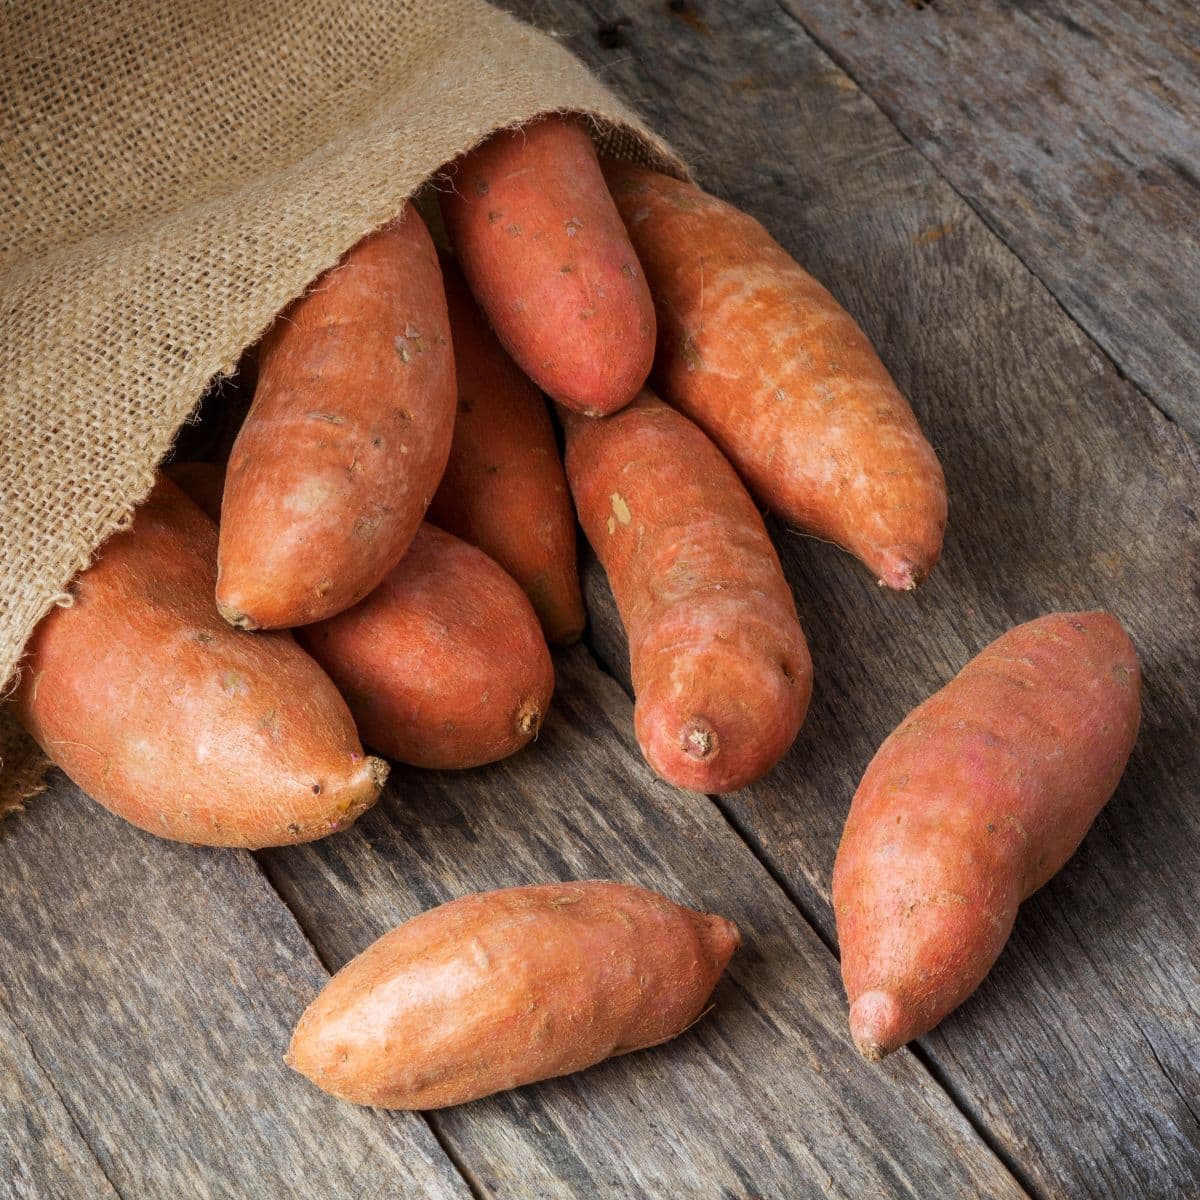 How To Tell If A Sweet Potato Is Bad (+ Storage Tips)